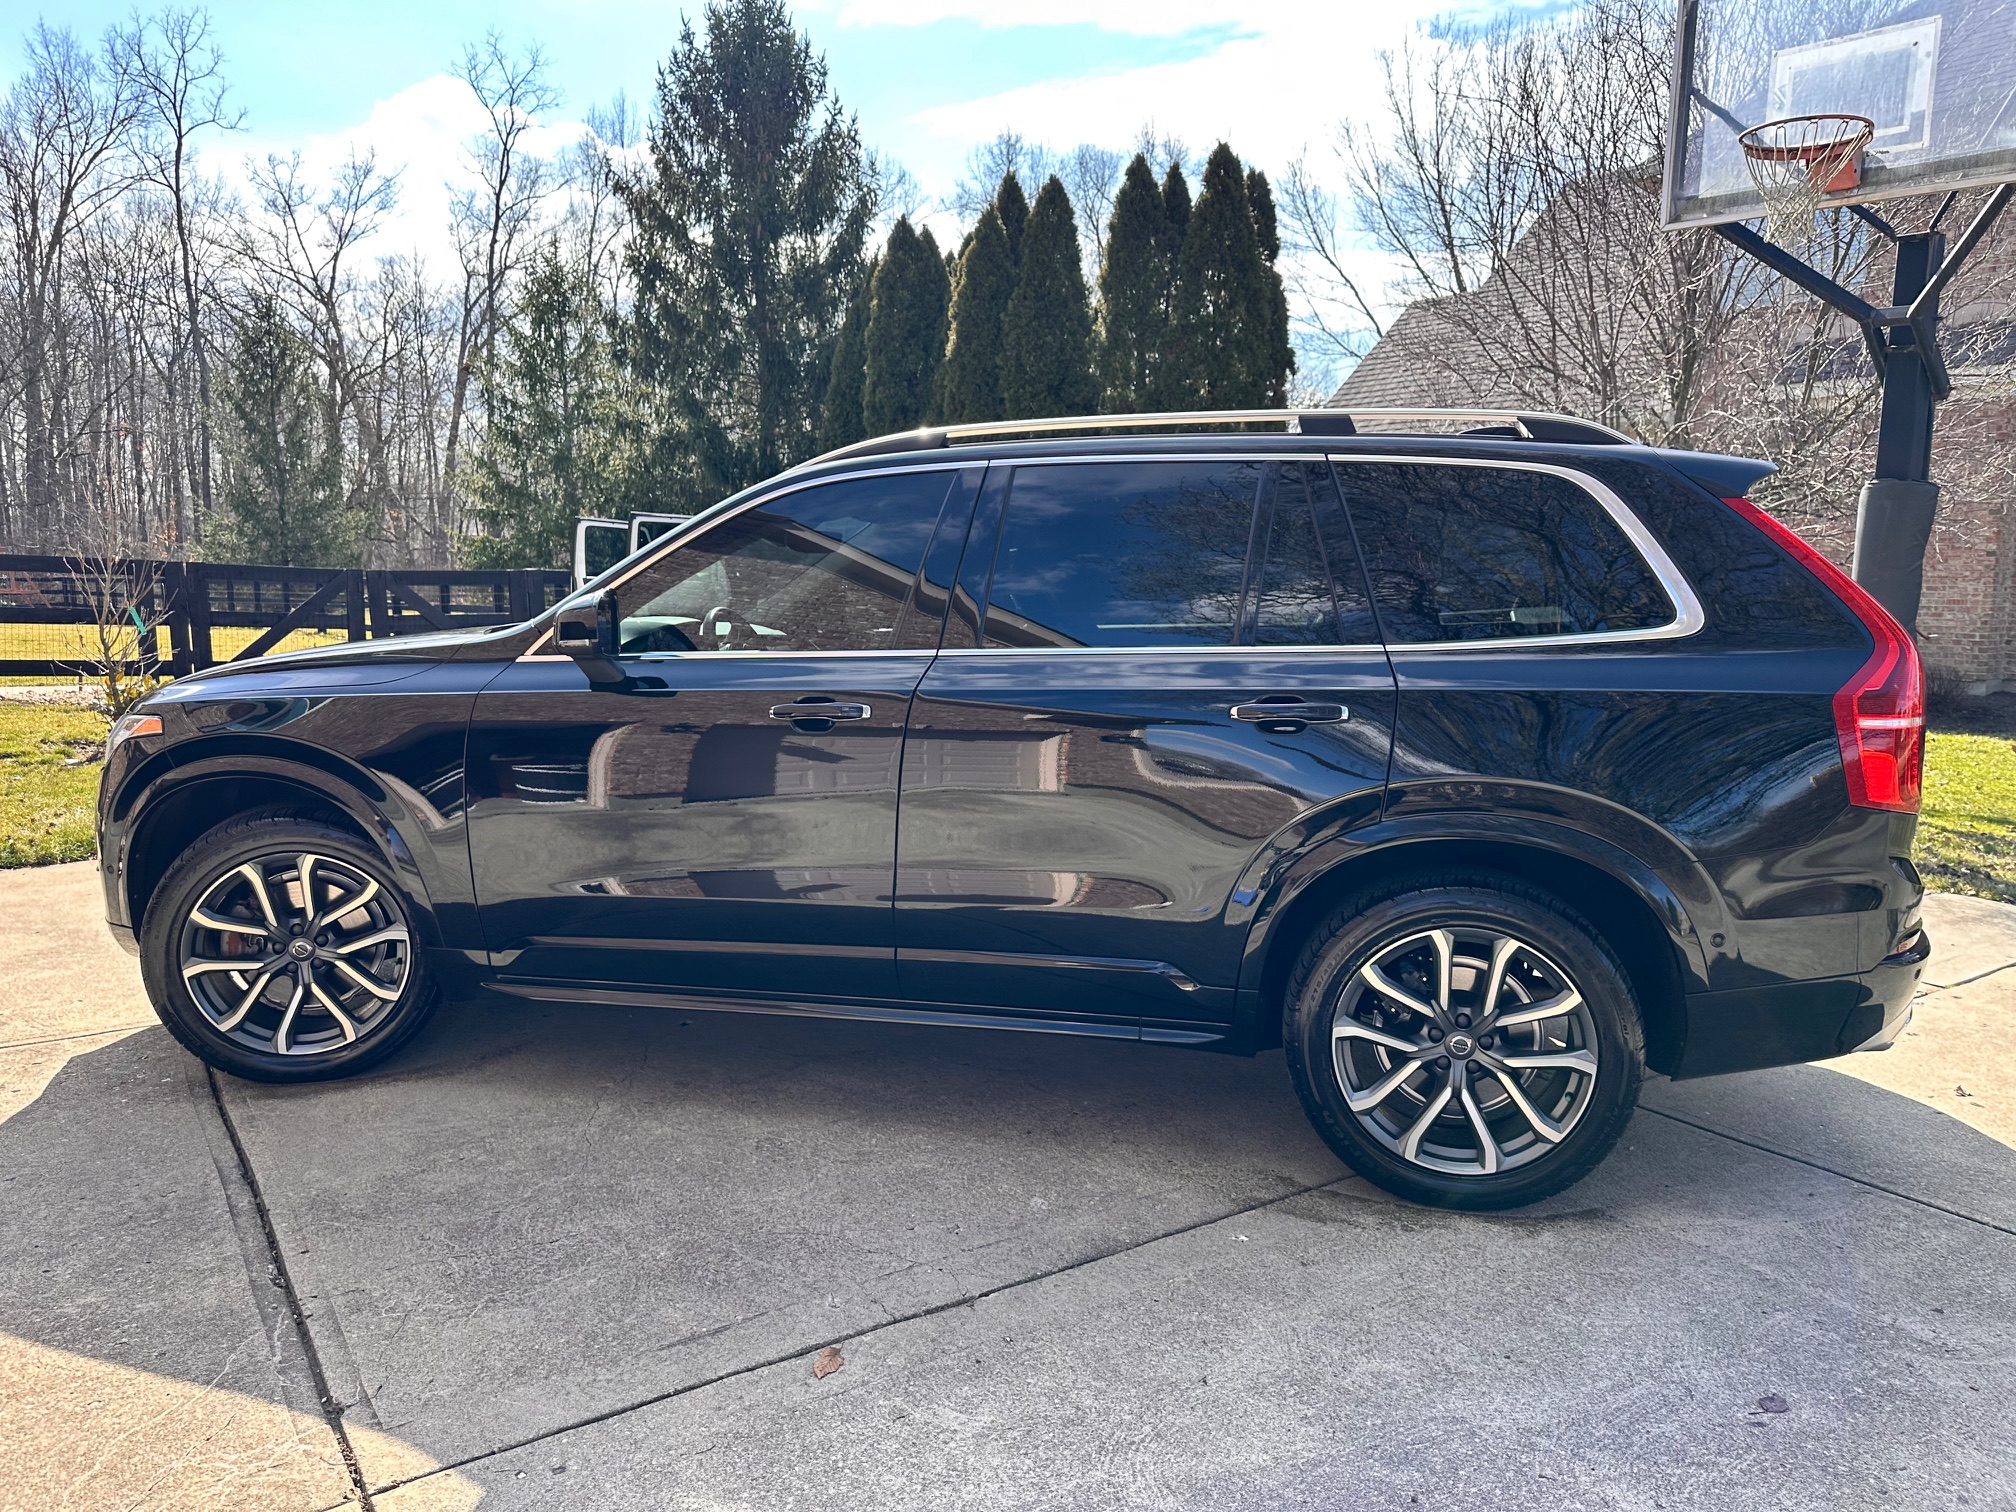 Used 2019 Volvo Cars for Sale Right Now - Autotrader